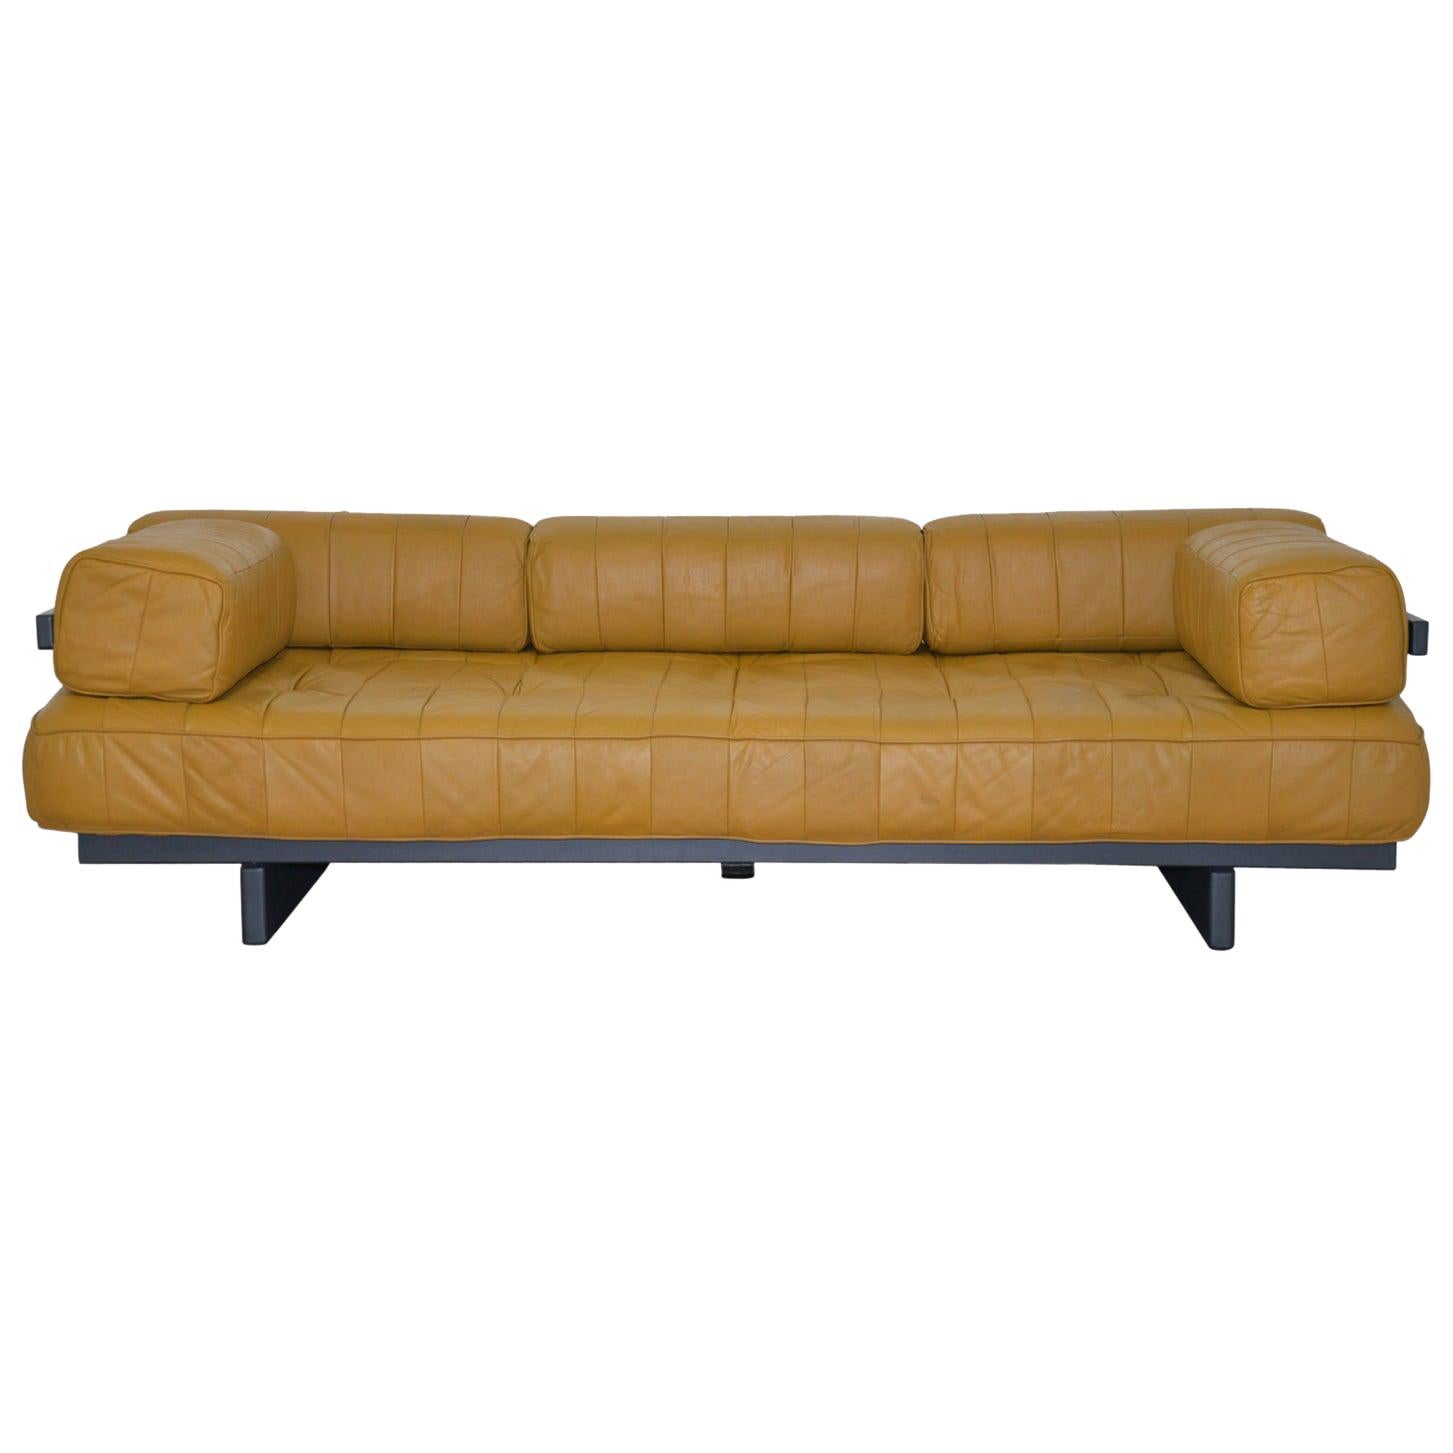 Vintage De Sede DS 80 Patchwork Leather Daybed, Switzerland, 1960`s For Sale